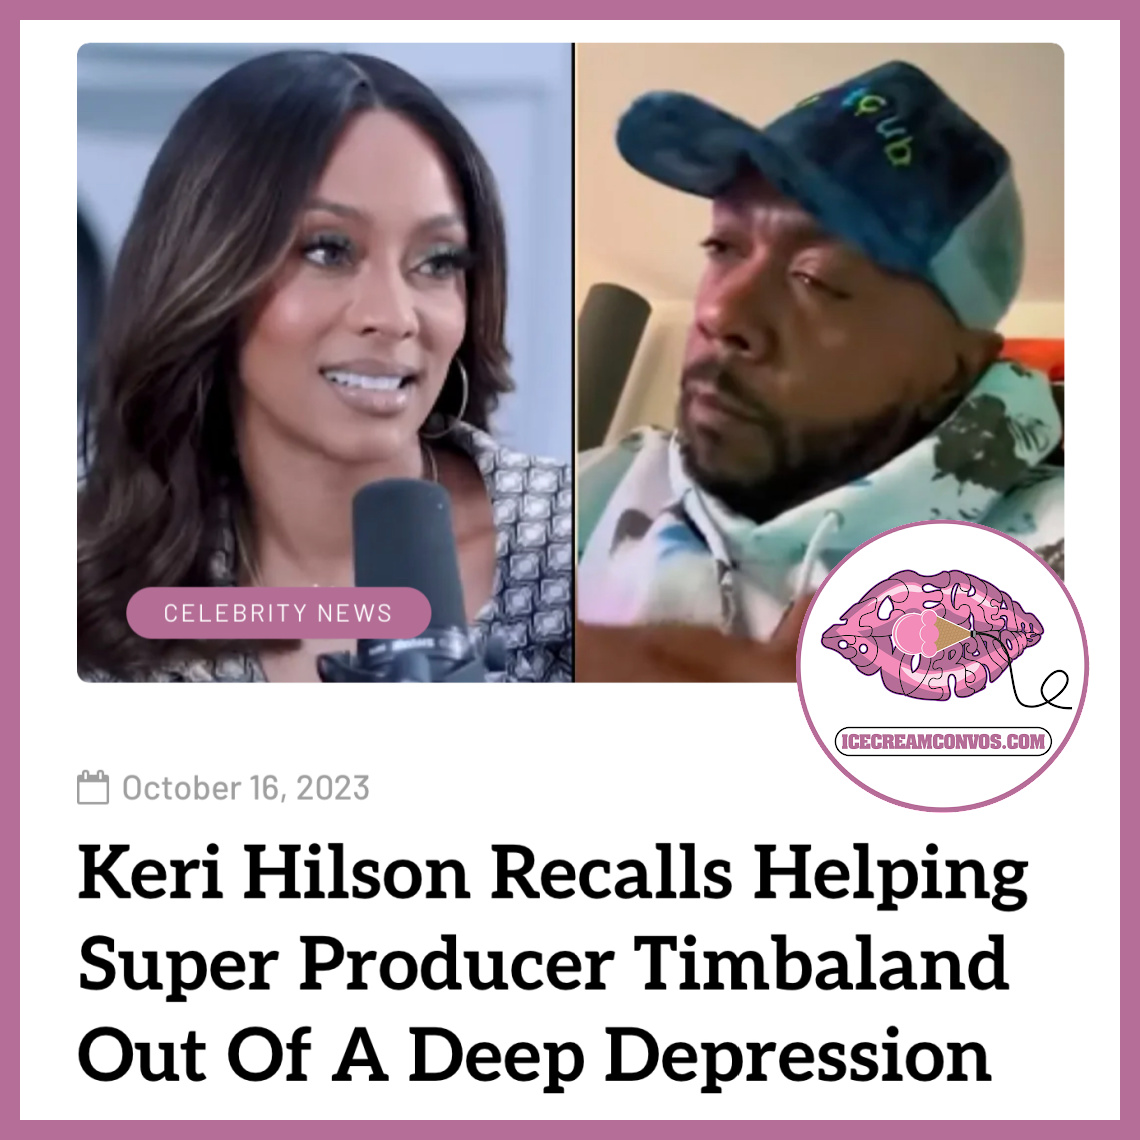 Keri Hilson Gushes About Tyler, The Creator, 'He's So Fine, photo creator